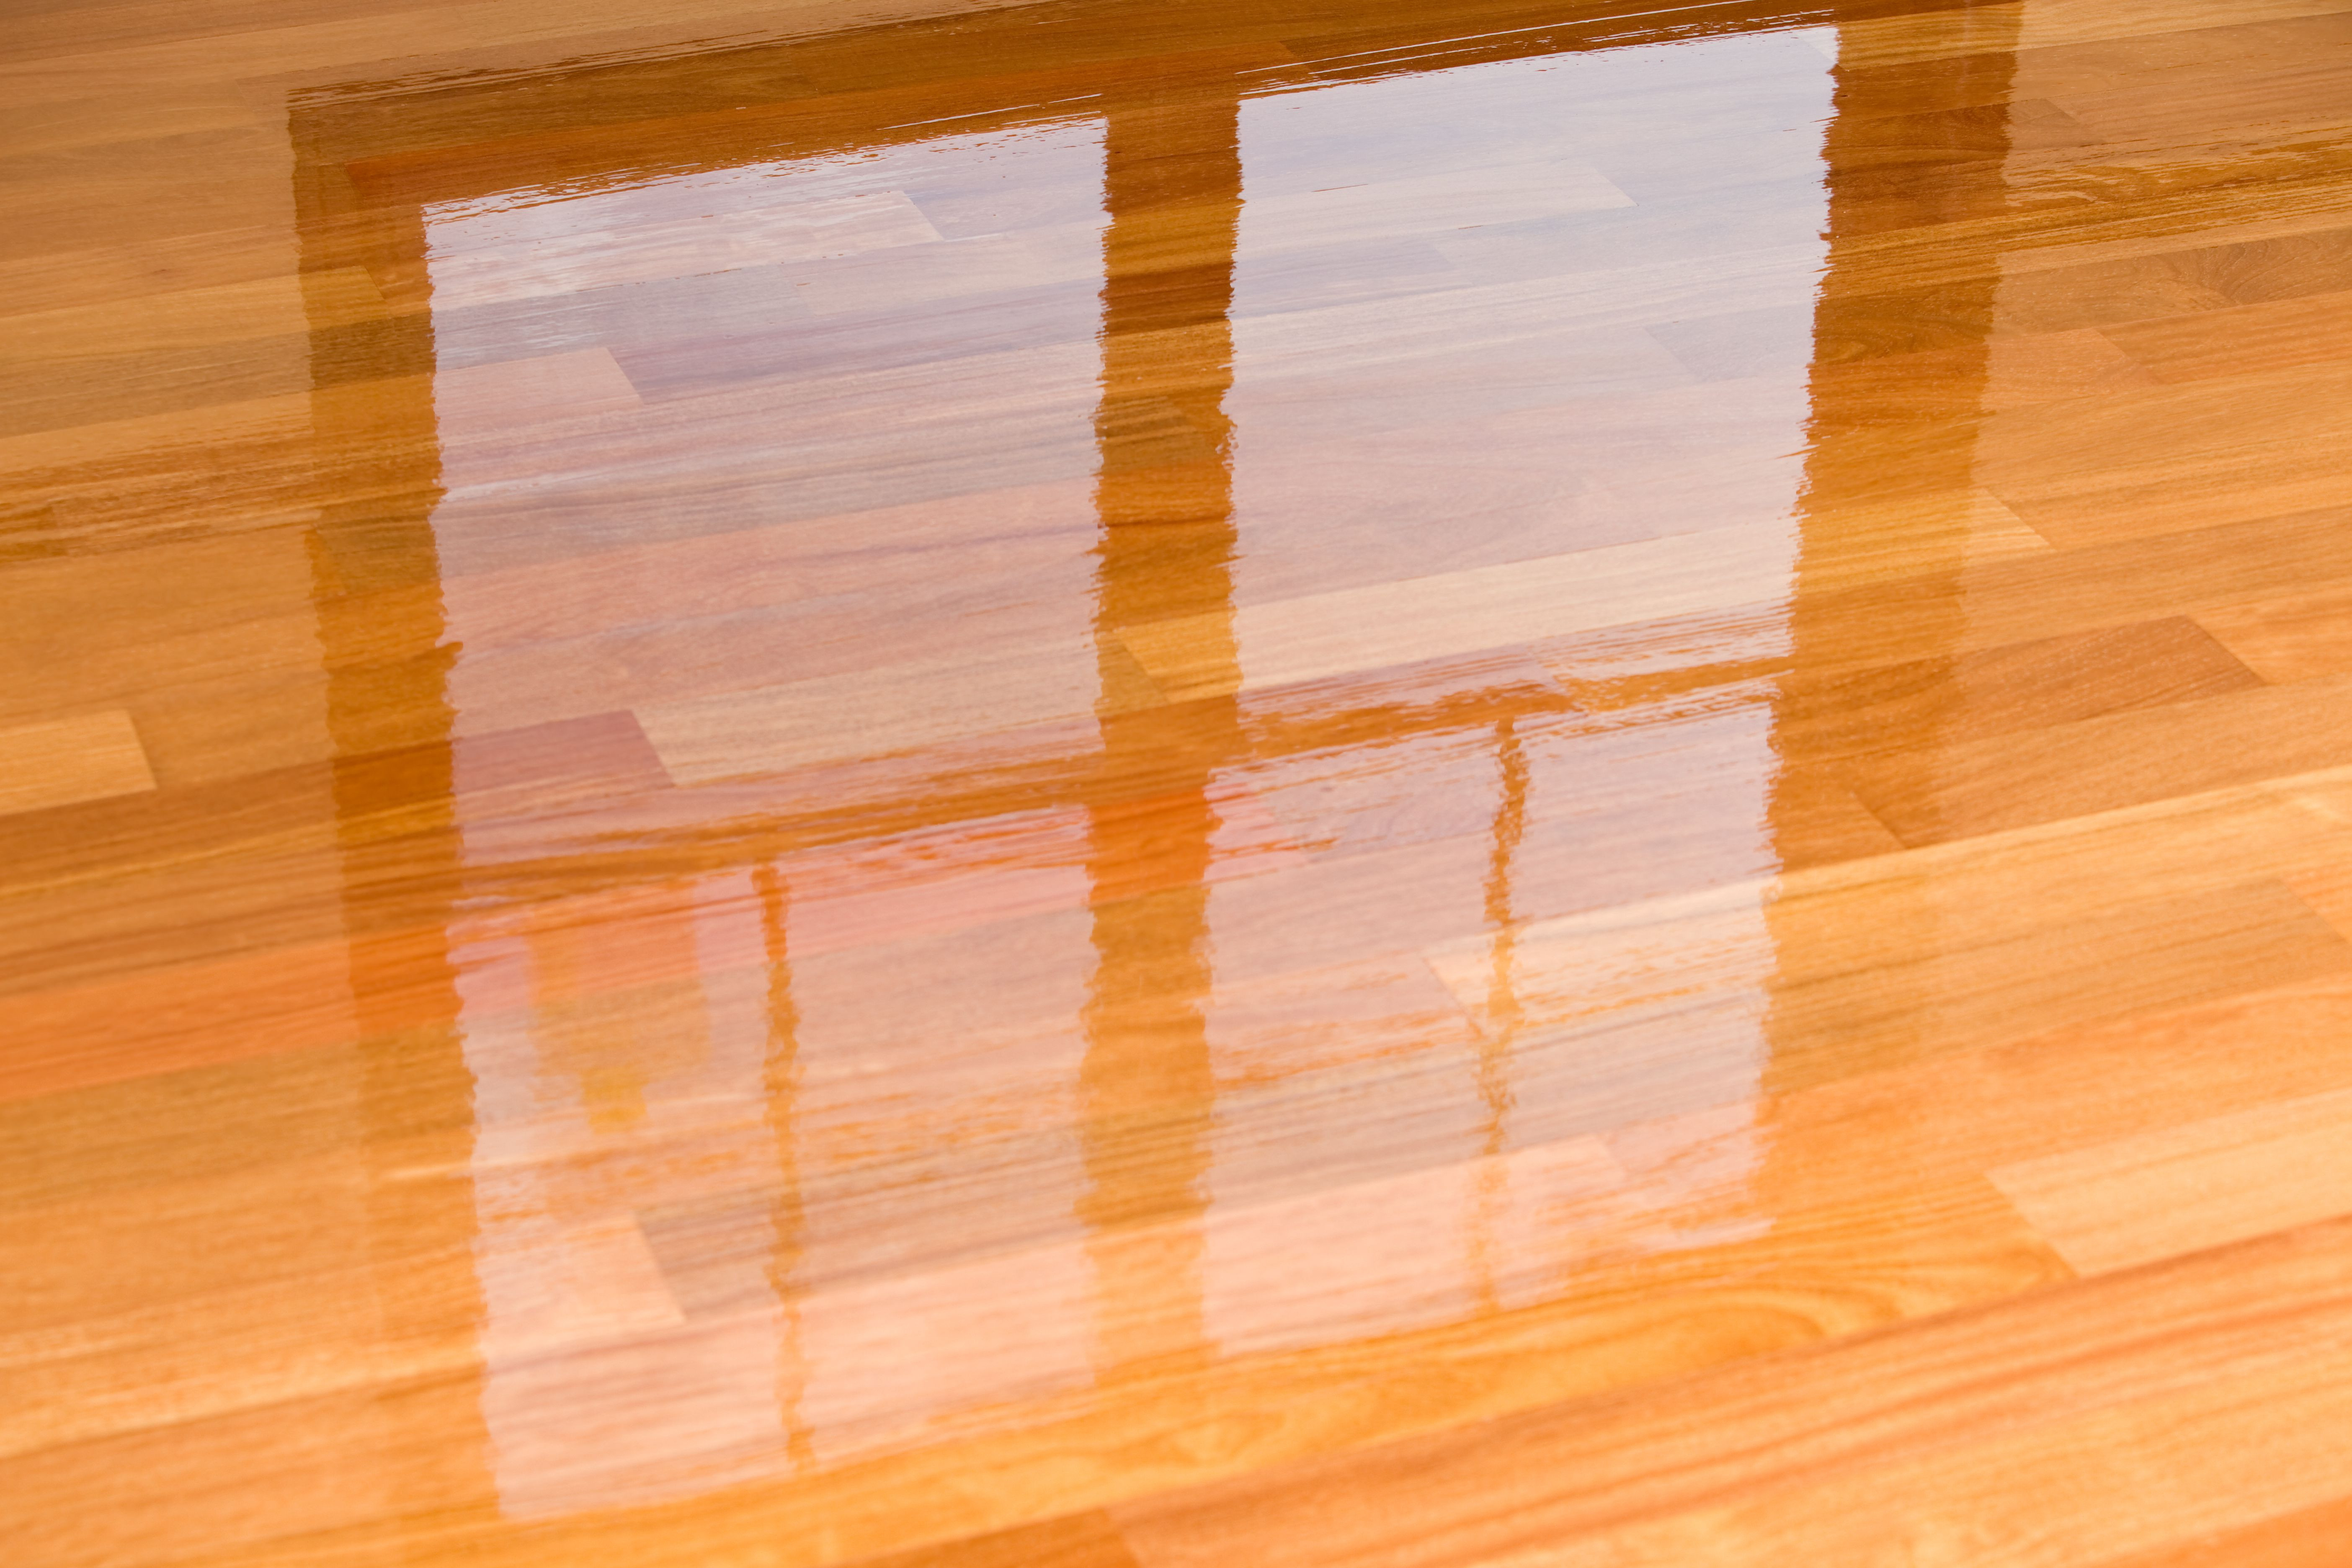 hardwood floor problems gaps of guide to laminate flooring water and damage repair regarding wet polyurethane on new hardwood floor with window reflection 183846705 582e34da3df78c6f6a403968